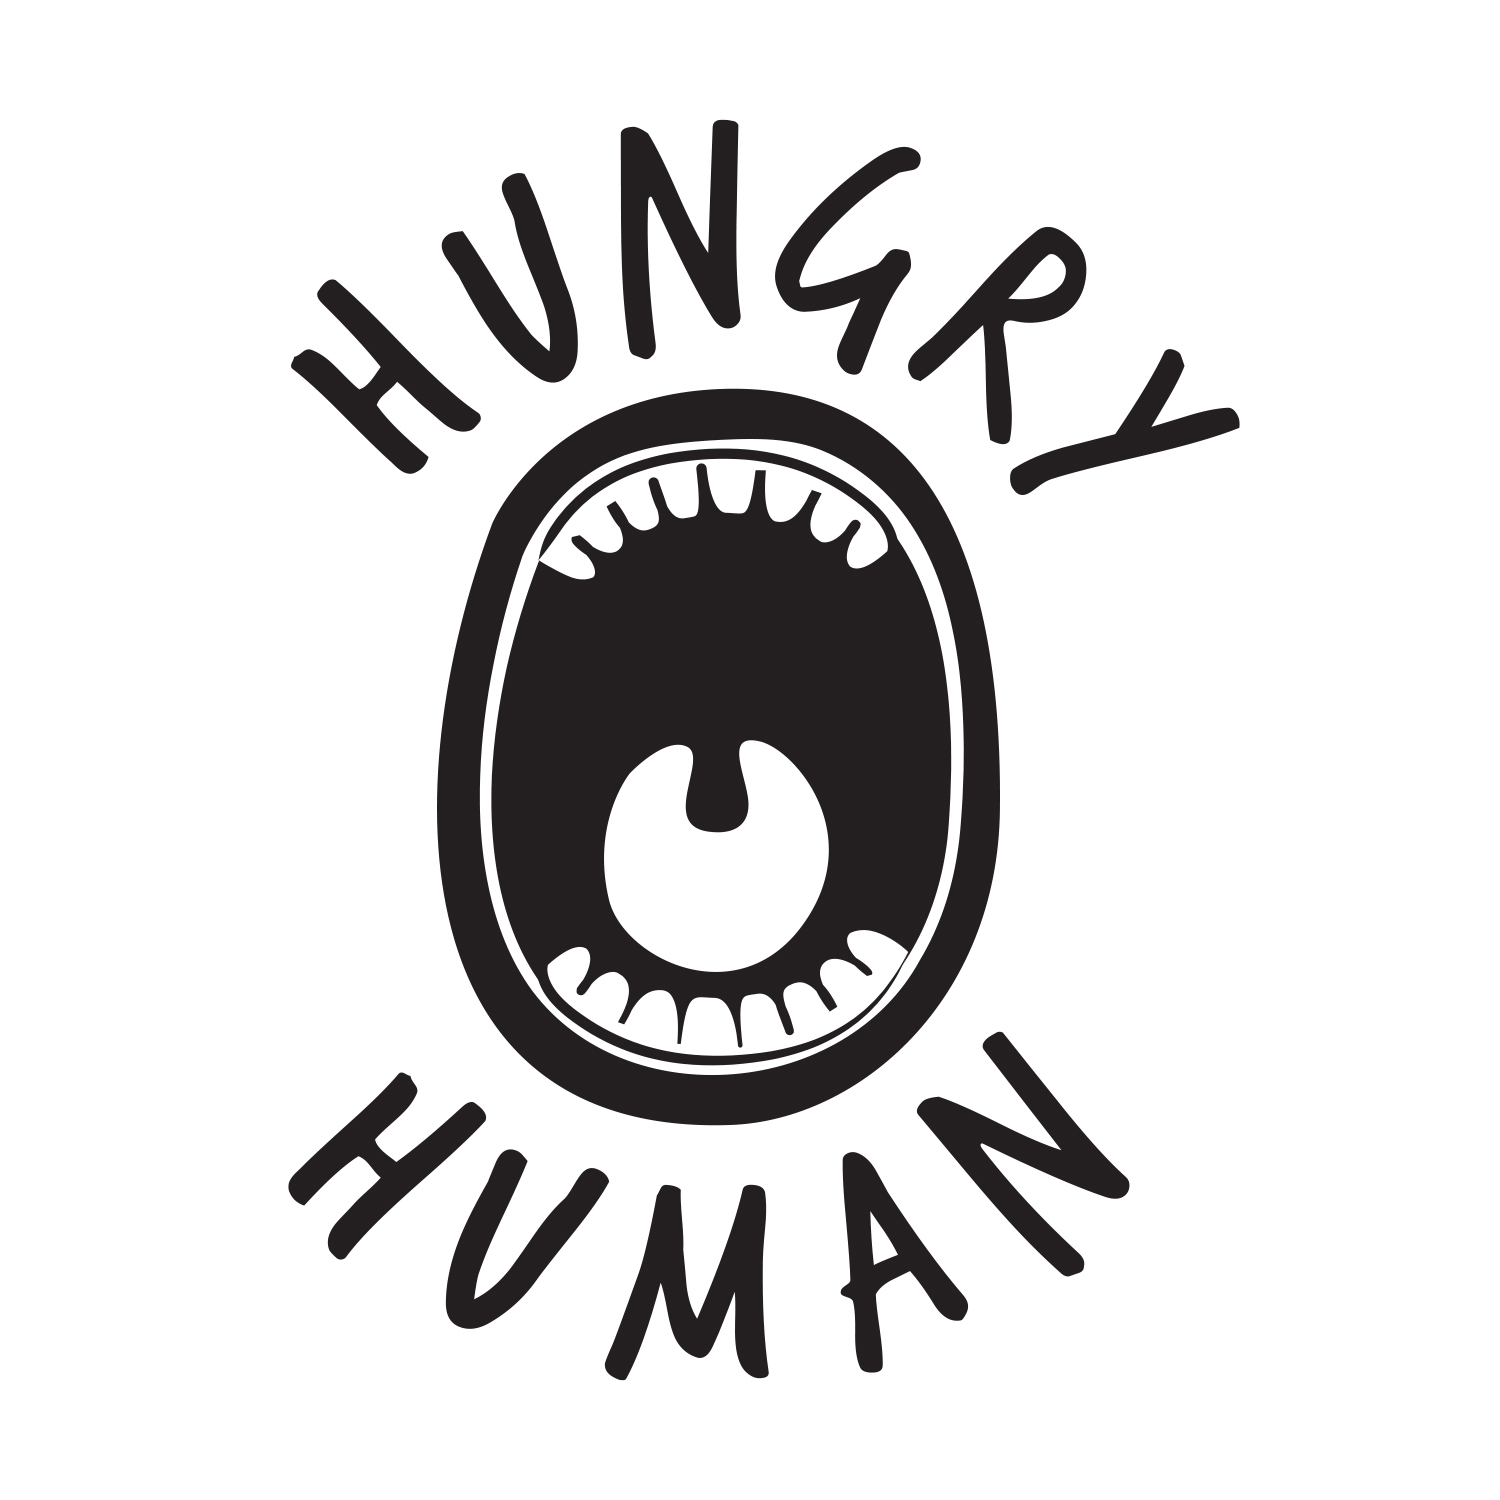 Hungry Human Music logo in Black